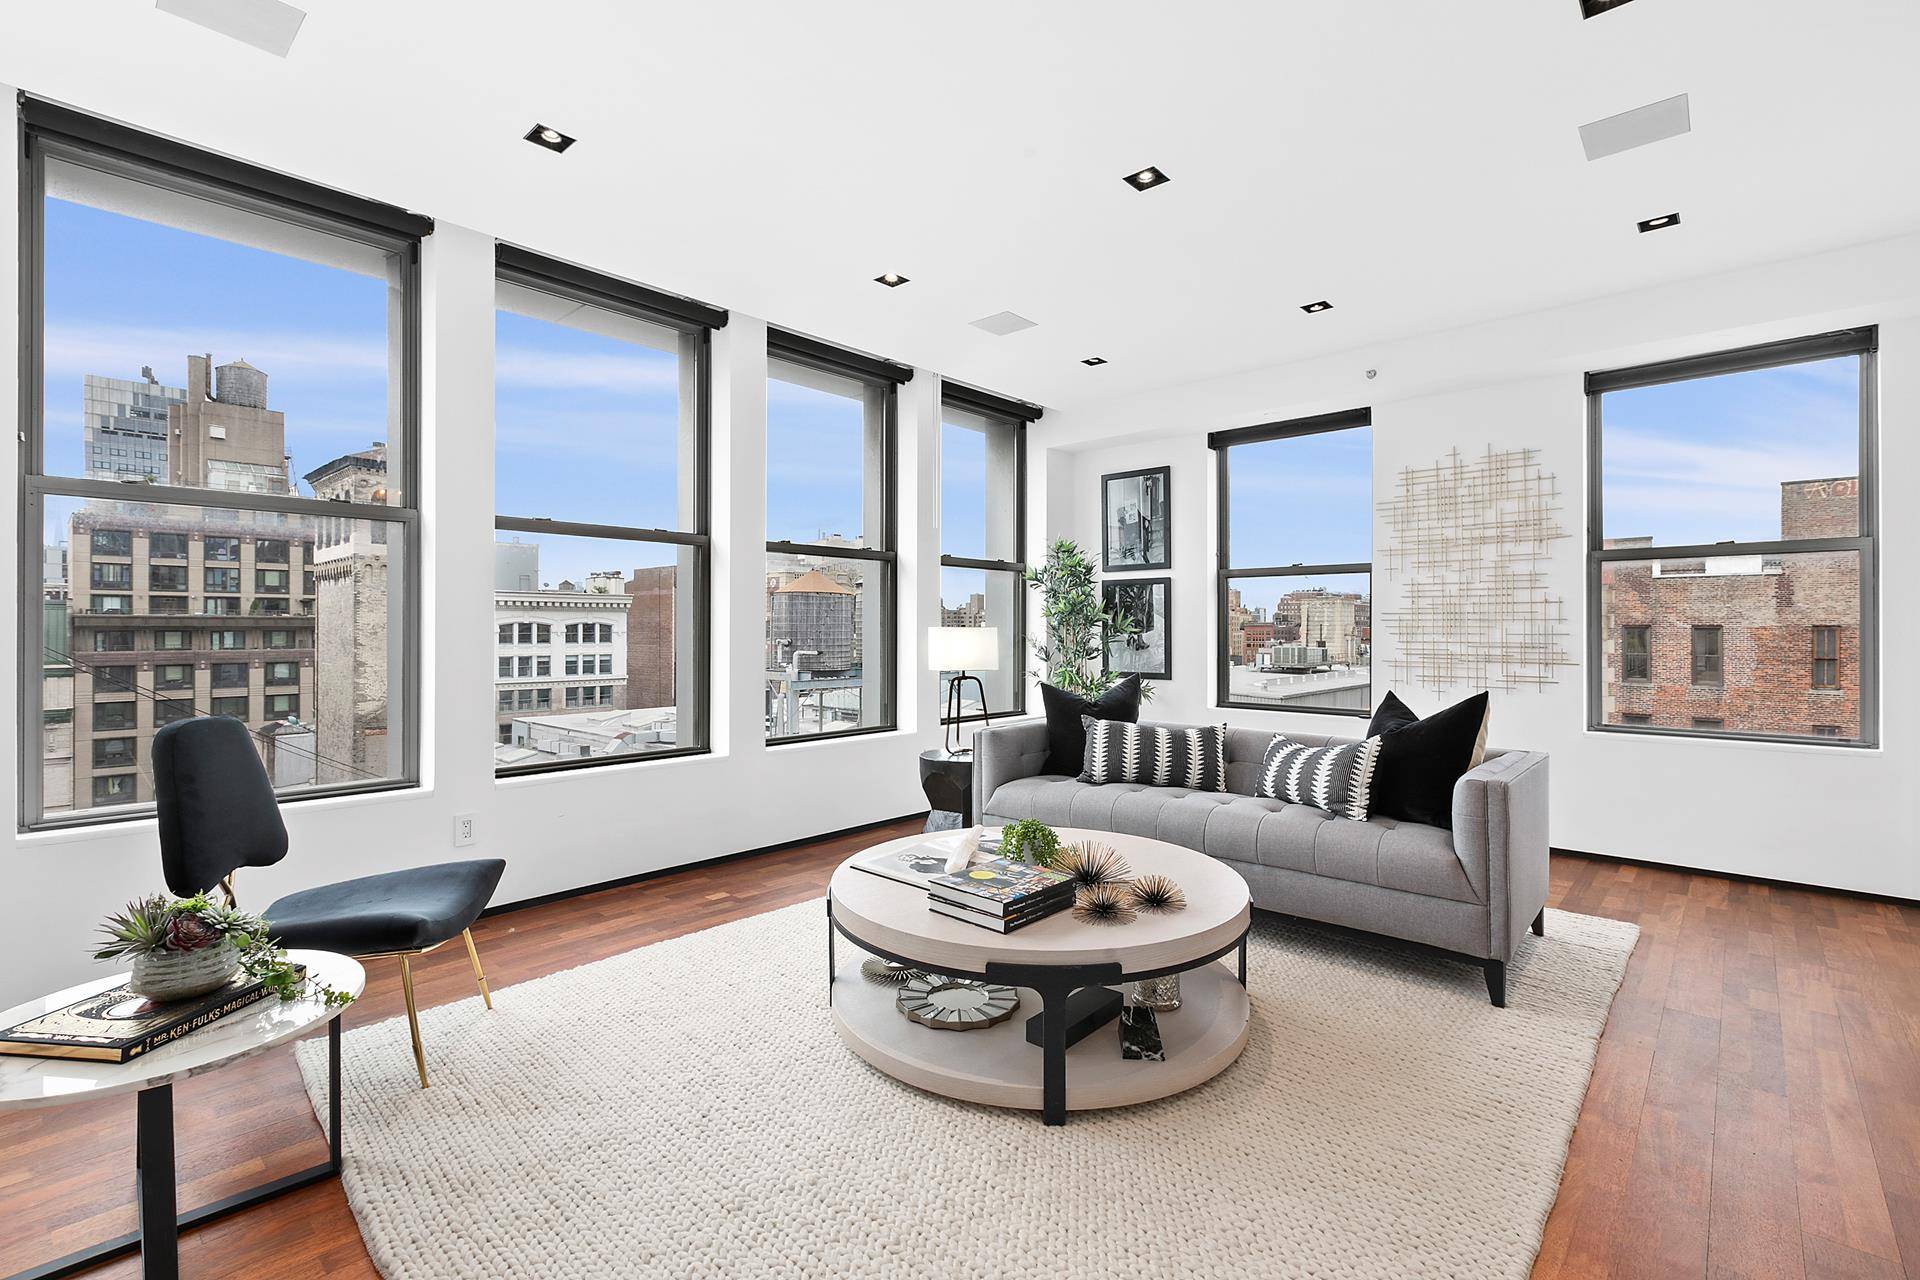 Secluded townhouse in the sky with enormous private roof deck, stunning views and amazing light.